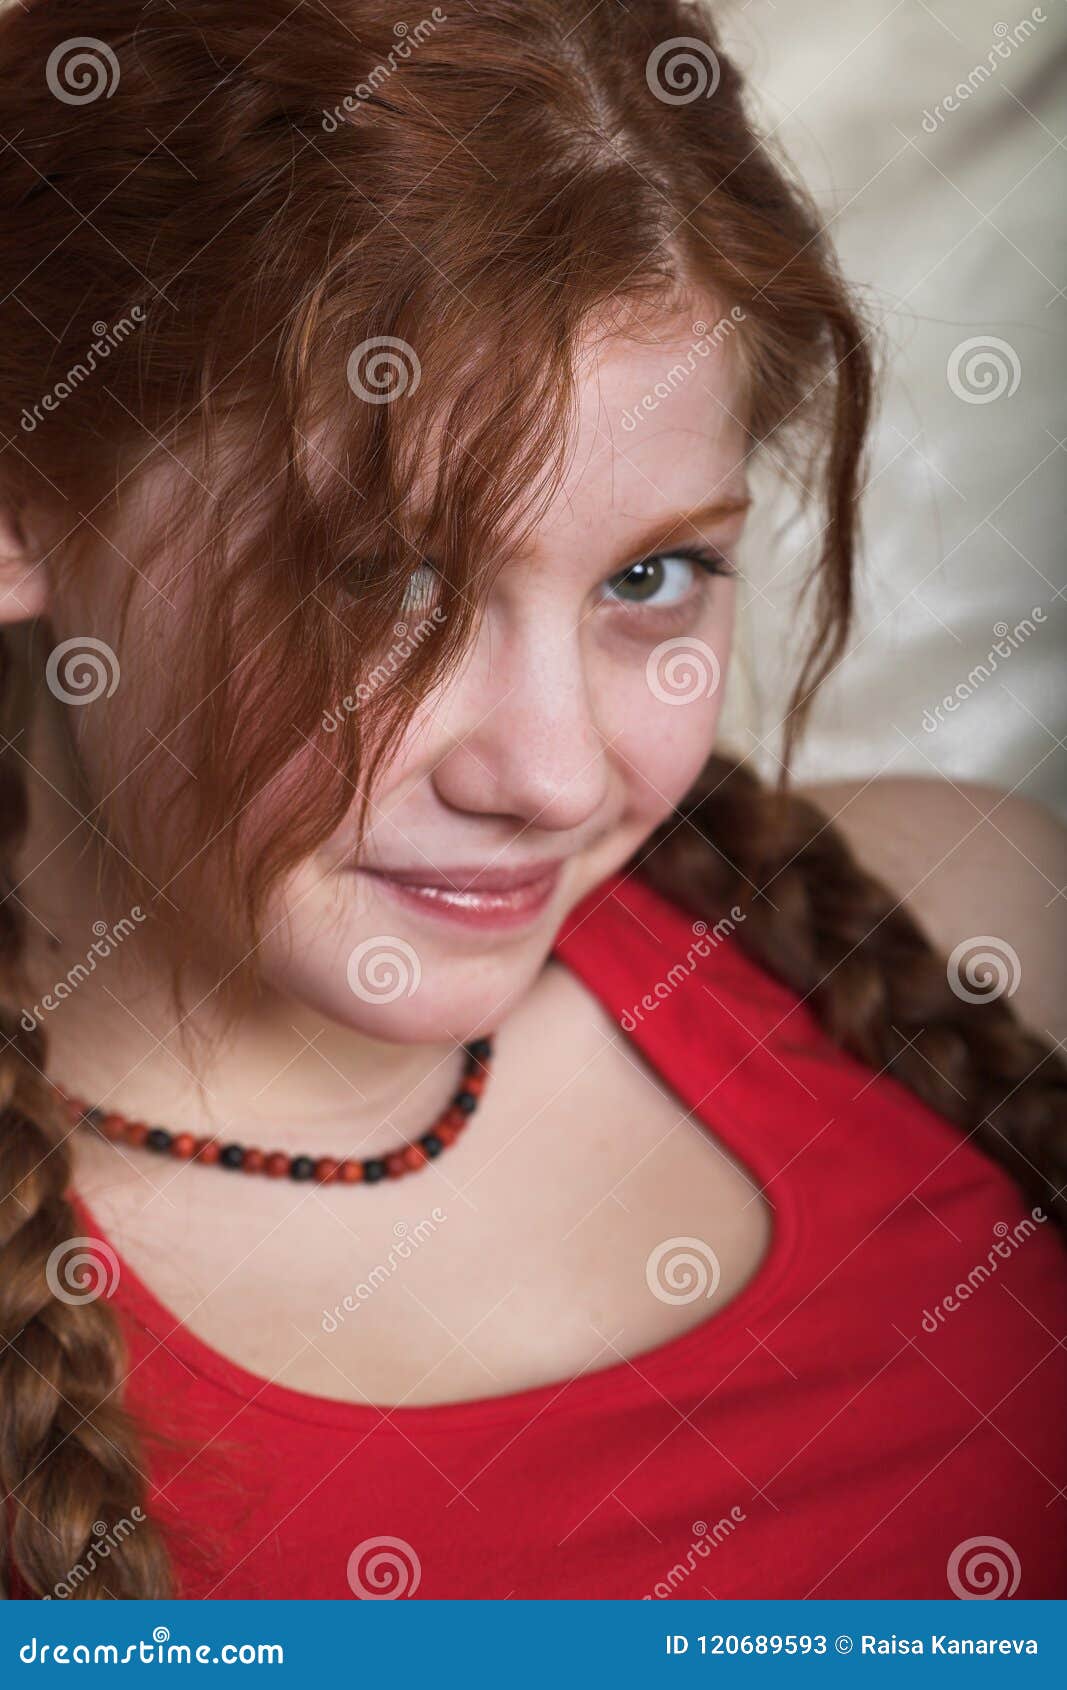 Picture Of Lovely Redhead Girl With Long Braids Stock Image Image Of Healthy Look 120689593